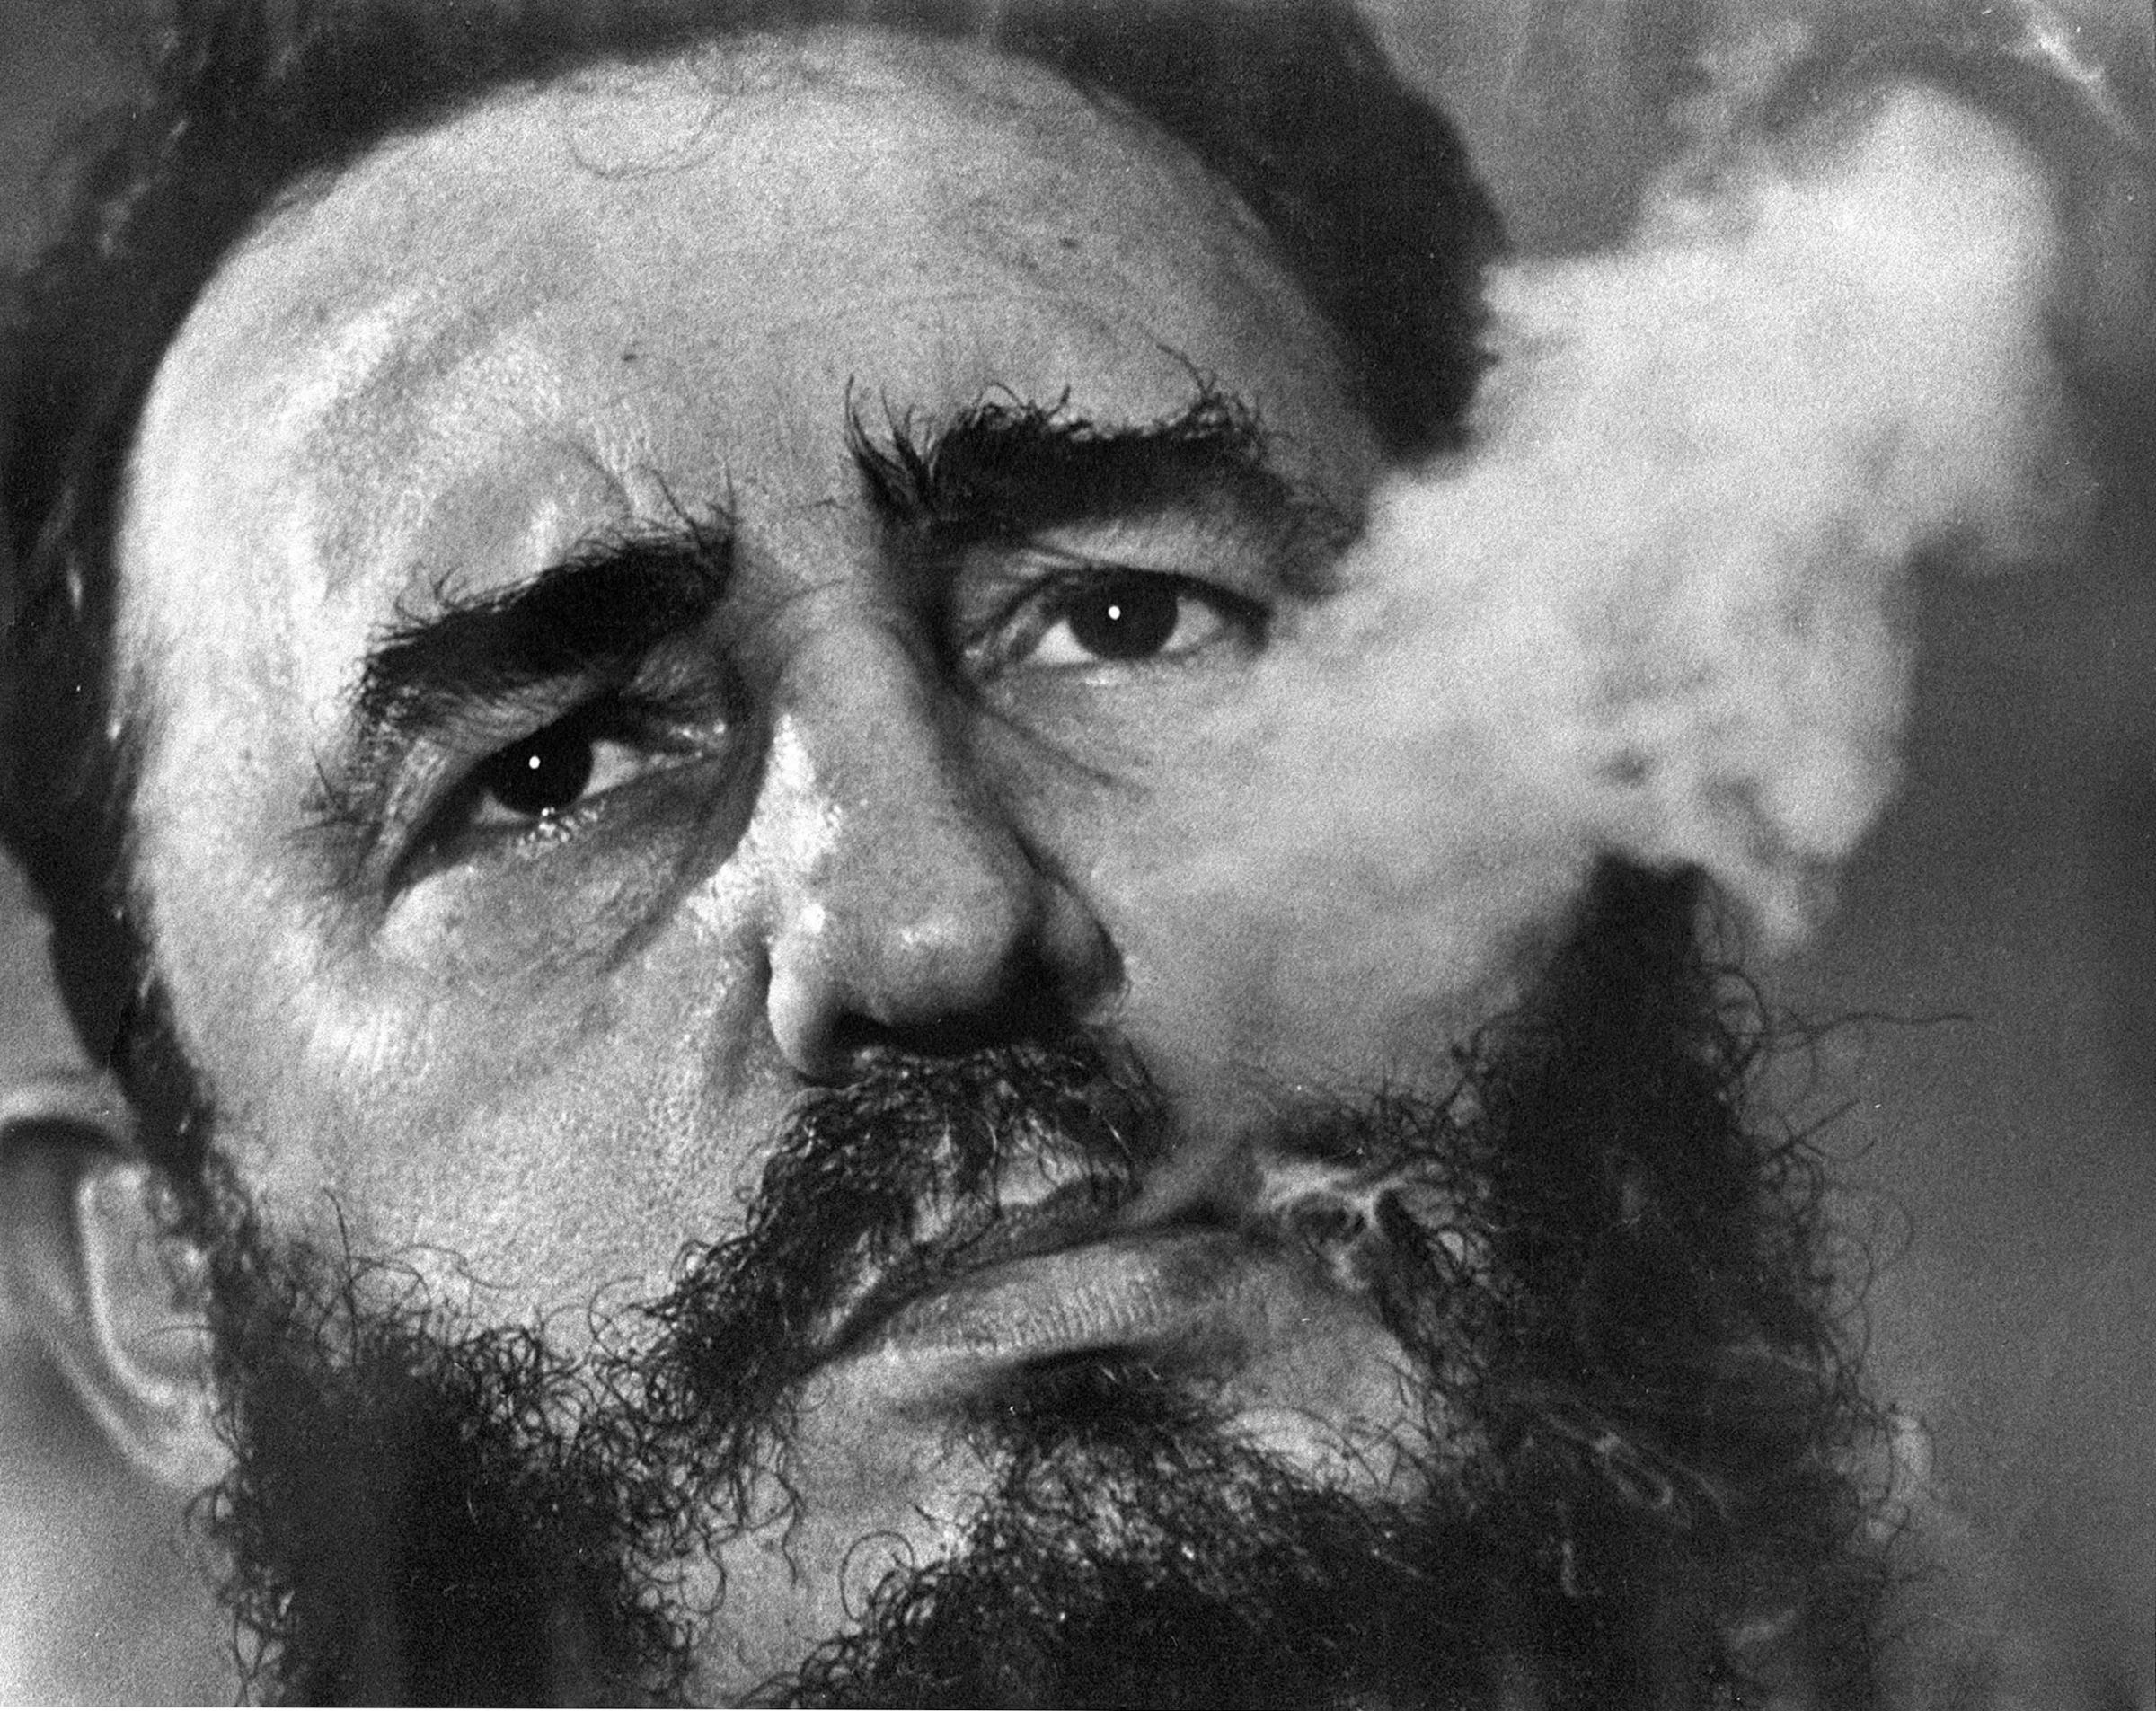 Cuban Prime Minister Fidel Castro exhales cigar smoke during a March 1985 interview at his presidential palace in Havana.